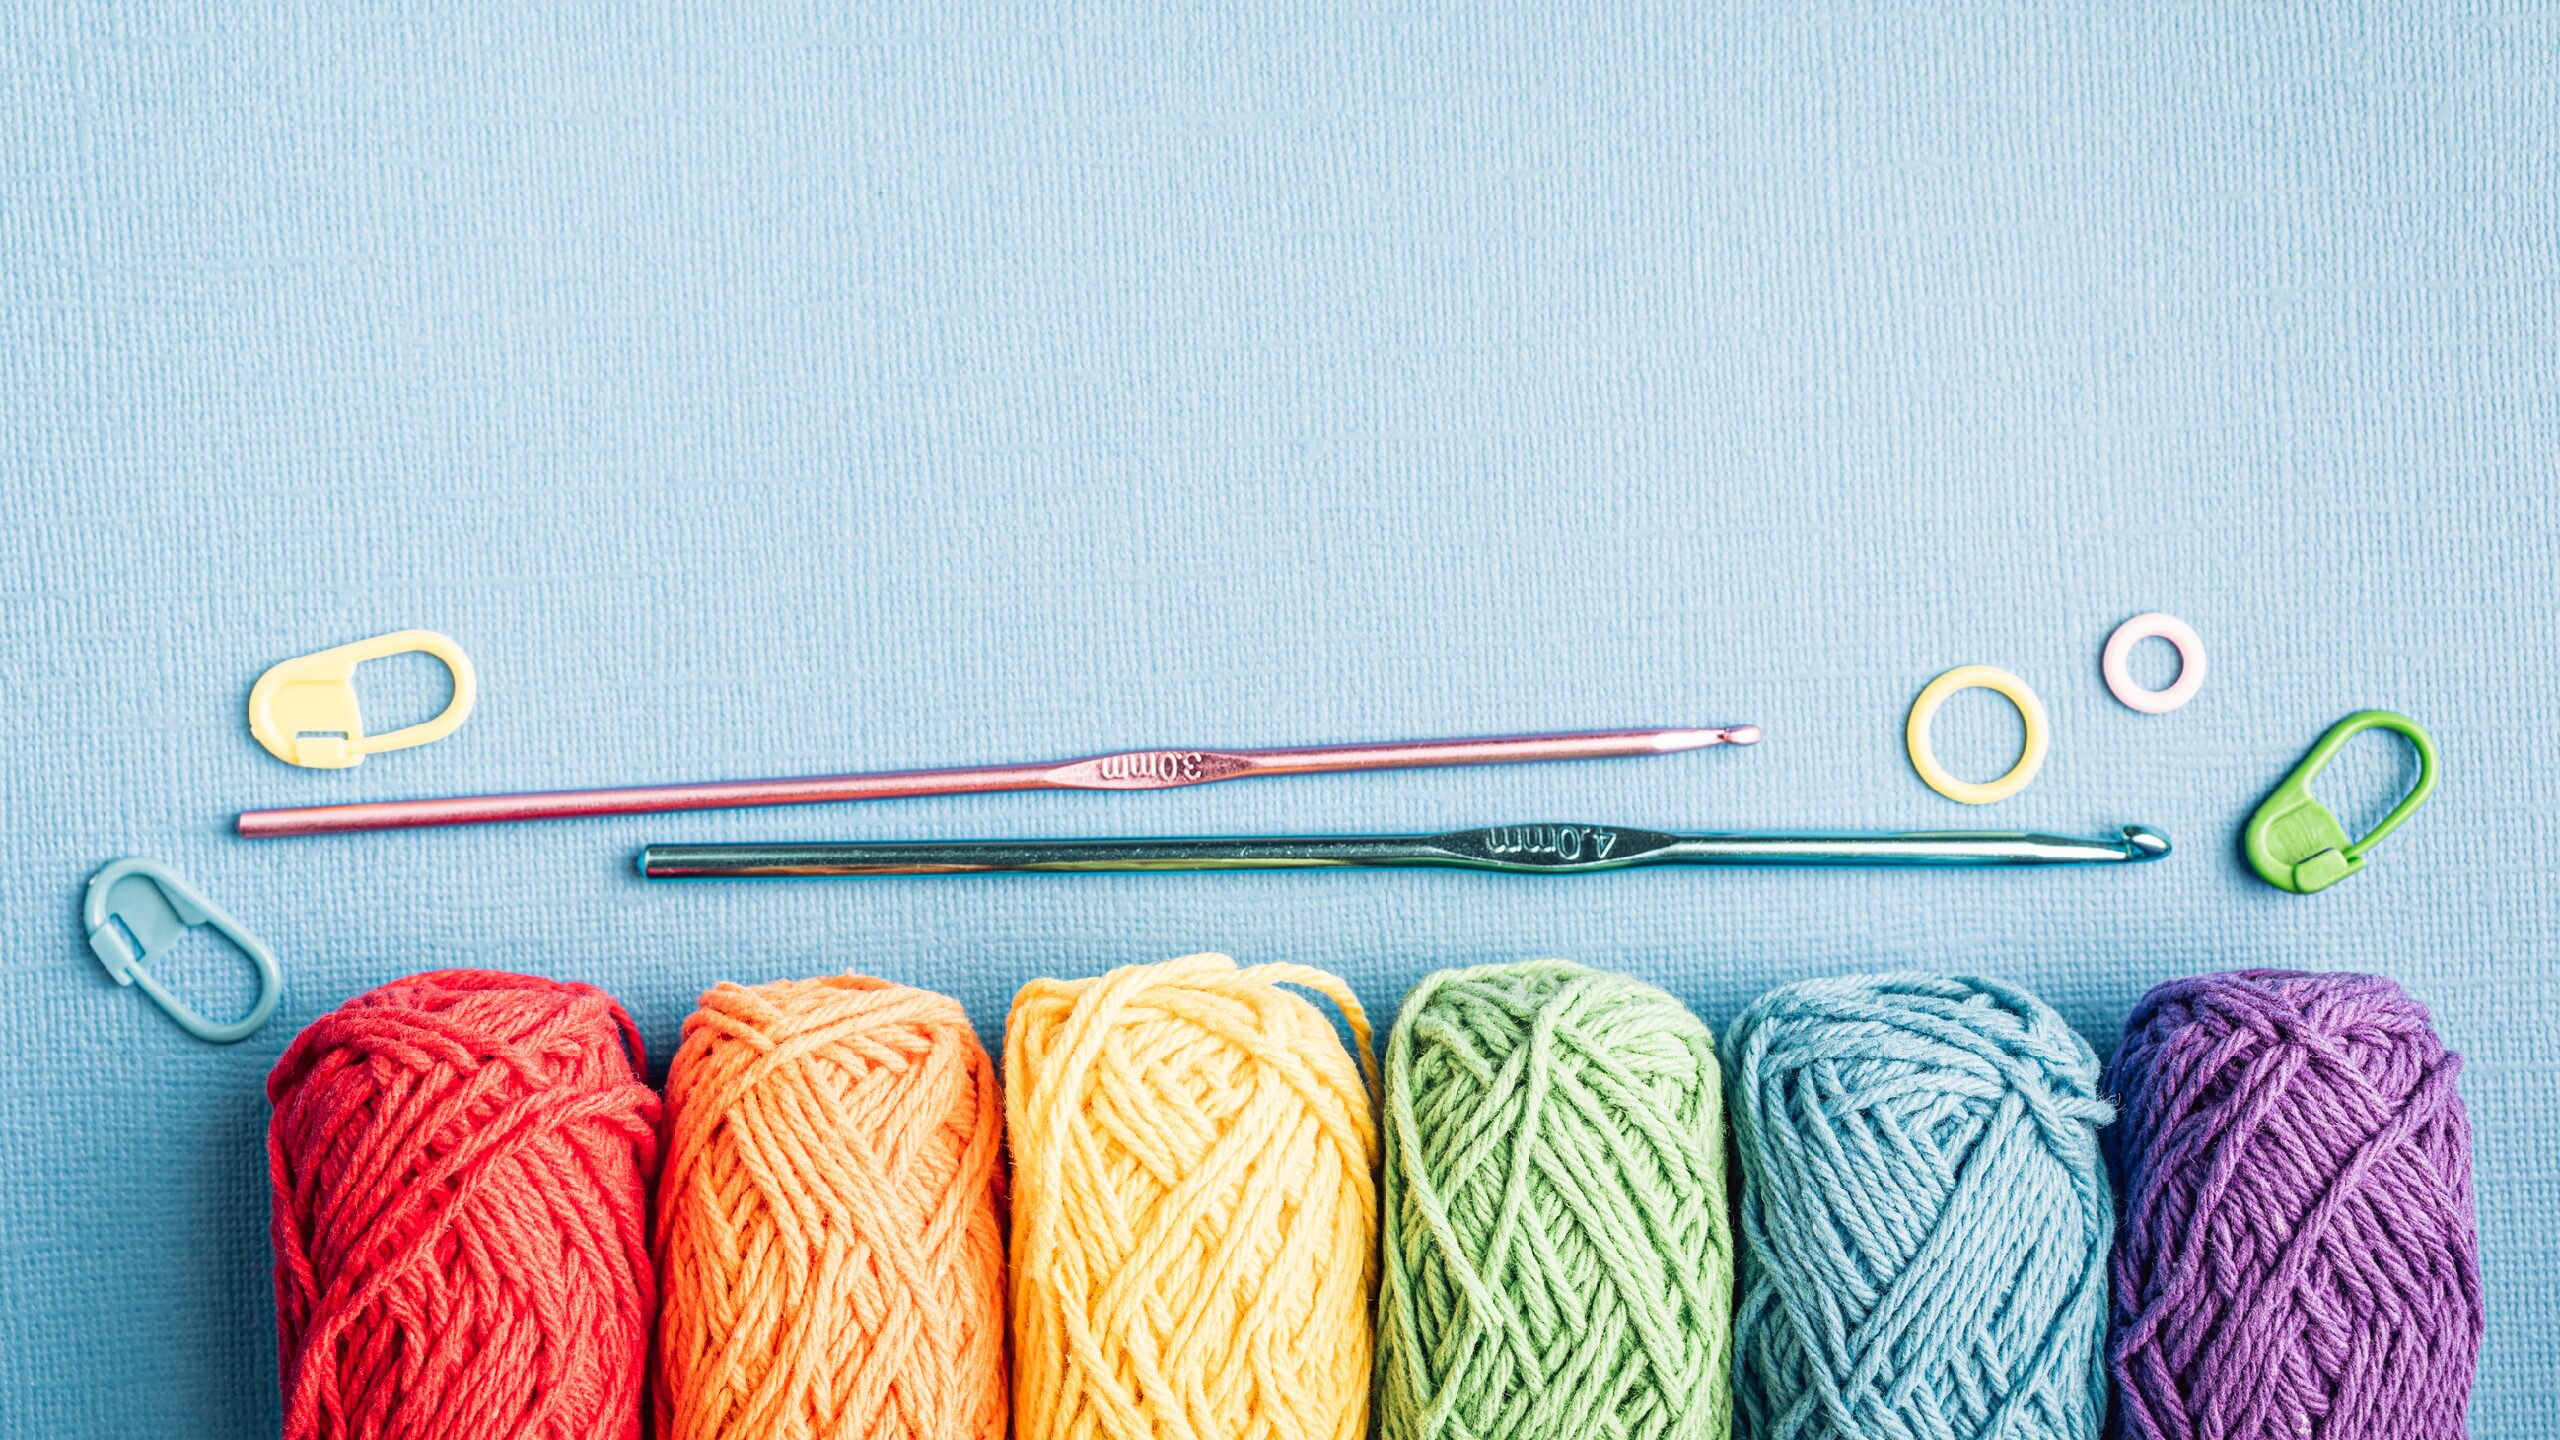 How can brands take advantage of the crochet renaissance?